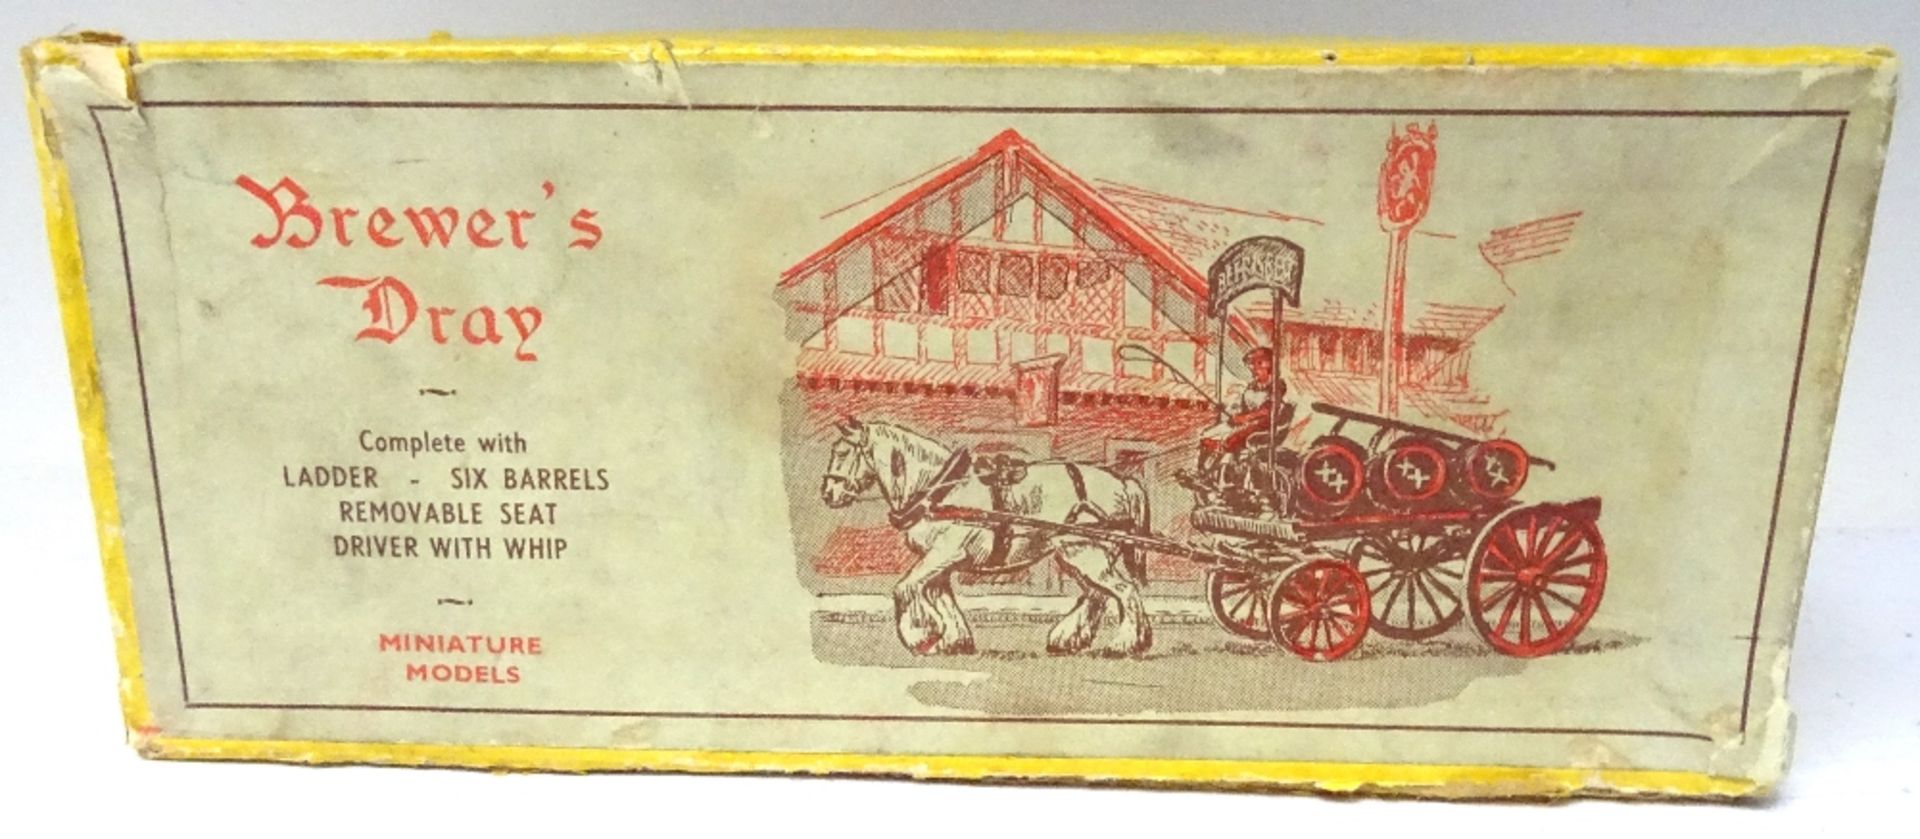 F G Taylor & Sons set 810 Brewer's Dray - Image 2 of 6